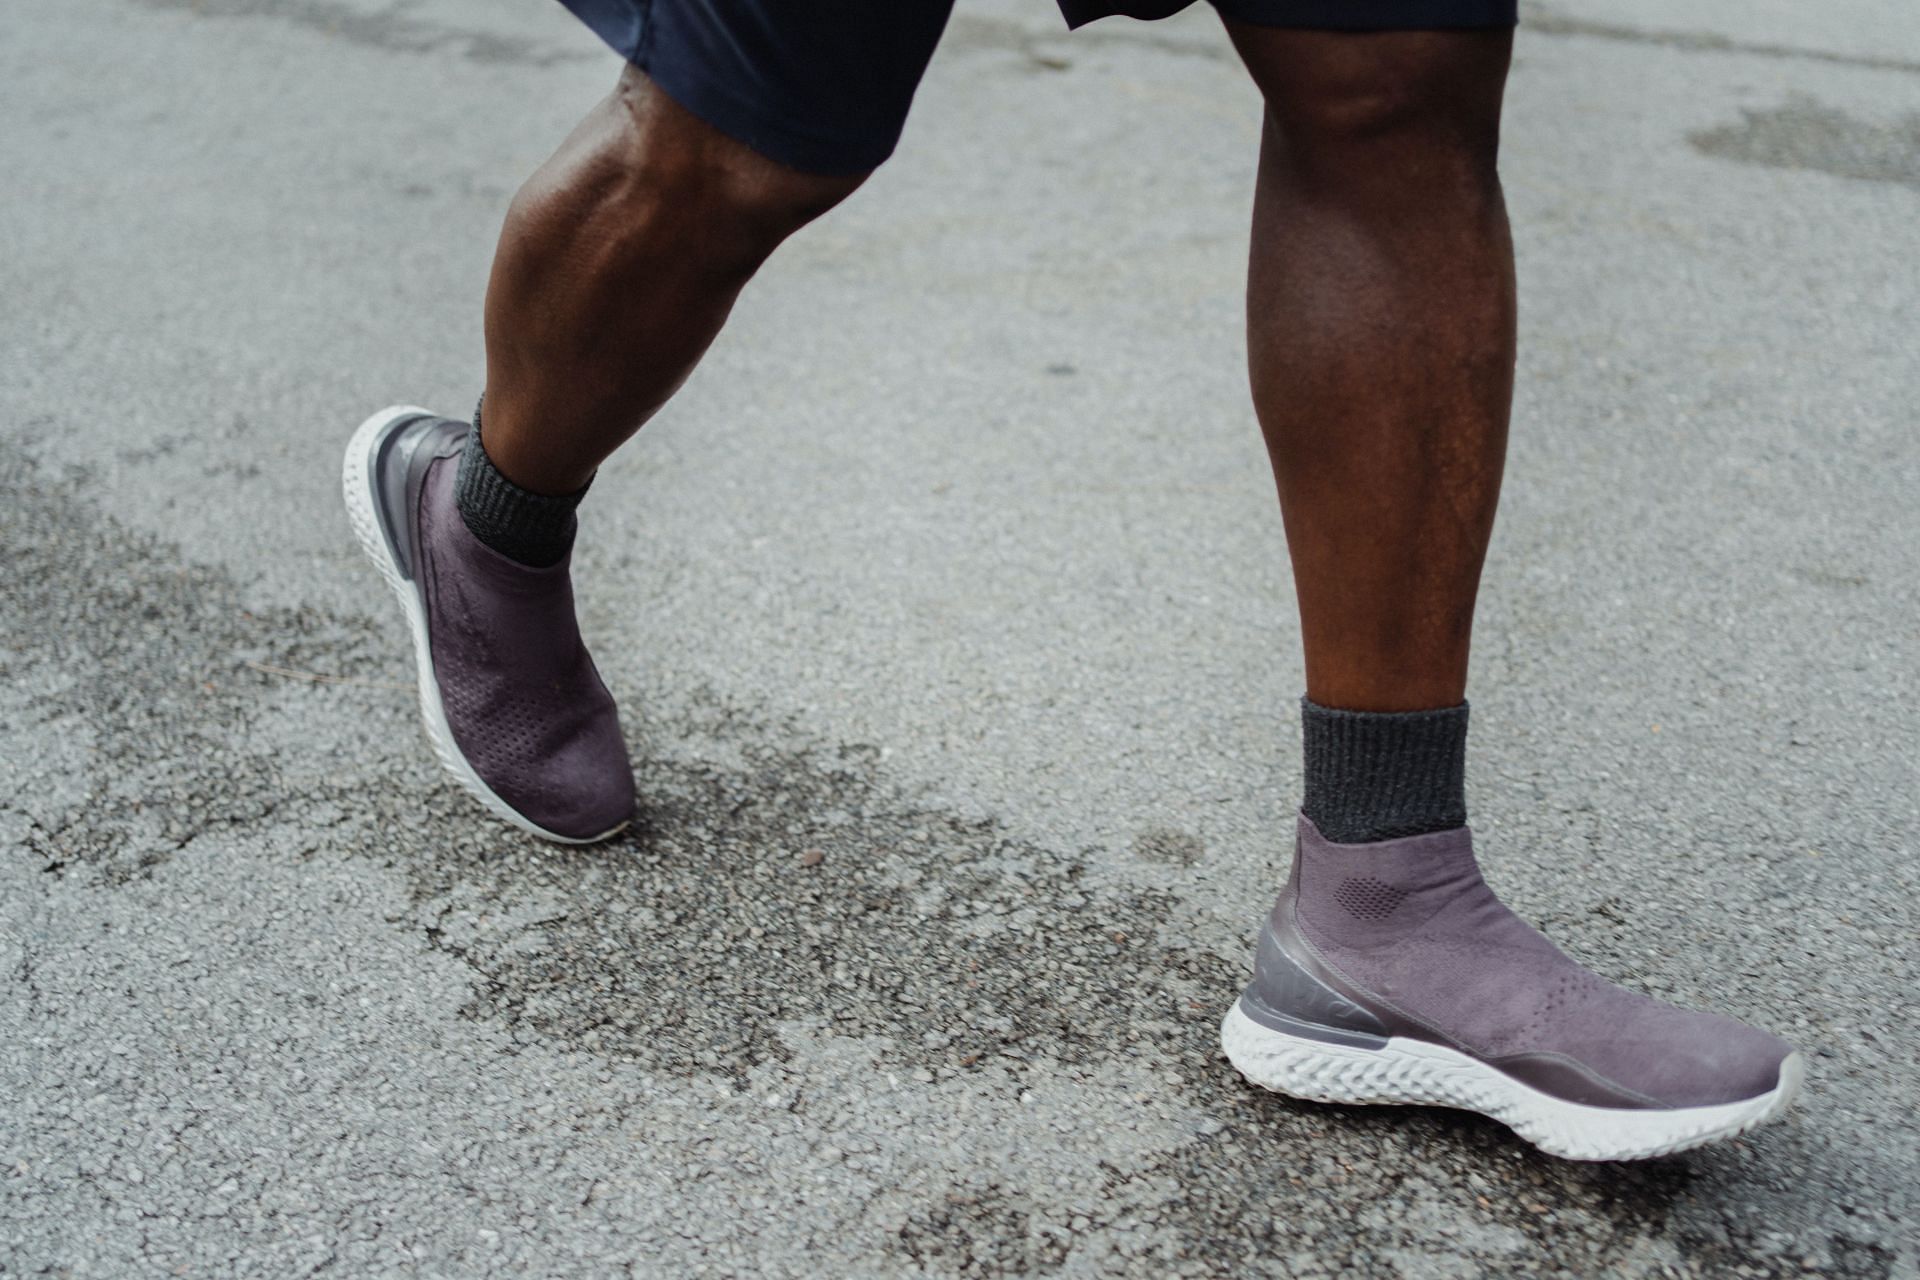 Benefits of using carbon-plated running shoes (image sourced via Pexels / Photo by Ketut)